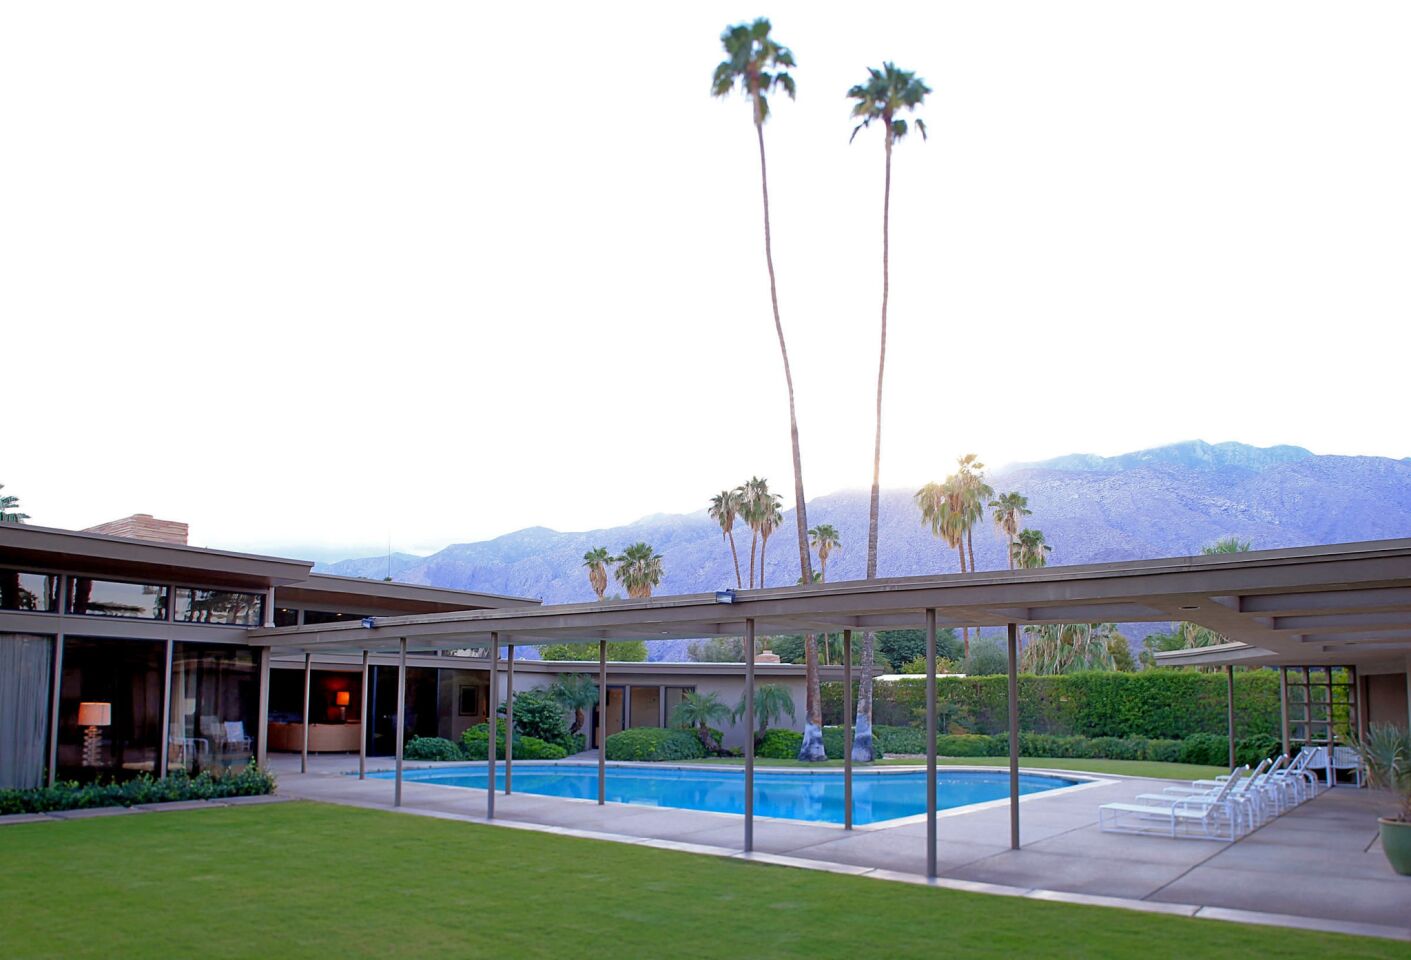 The former Sinatra residence known as Twin Palms, which features a piano-shaped pool, is now rented for vacations and events.